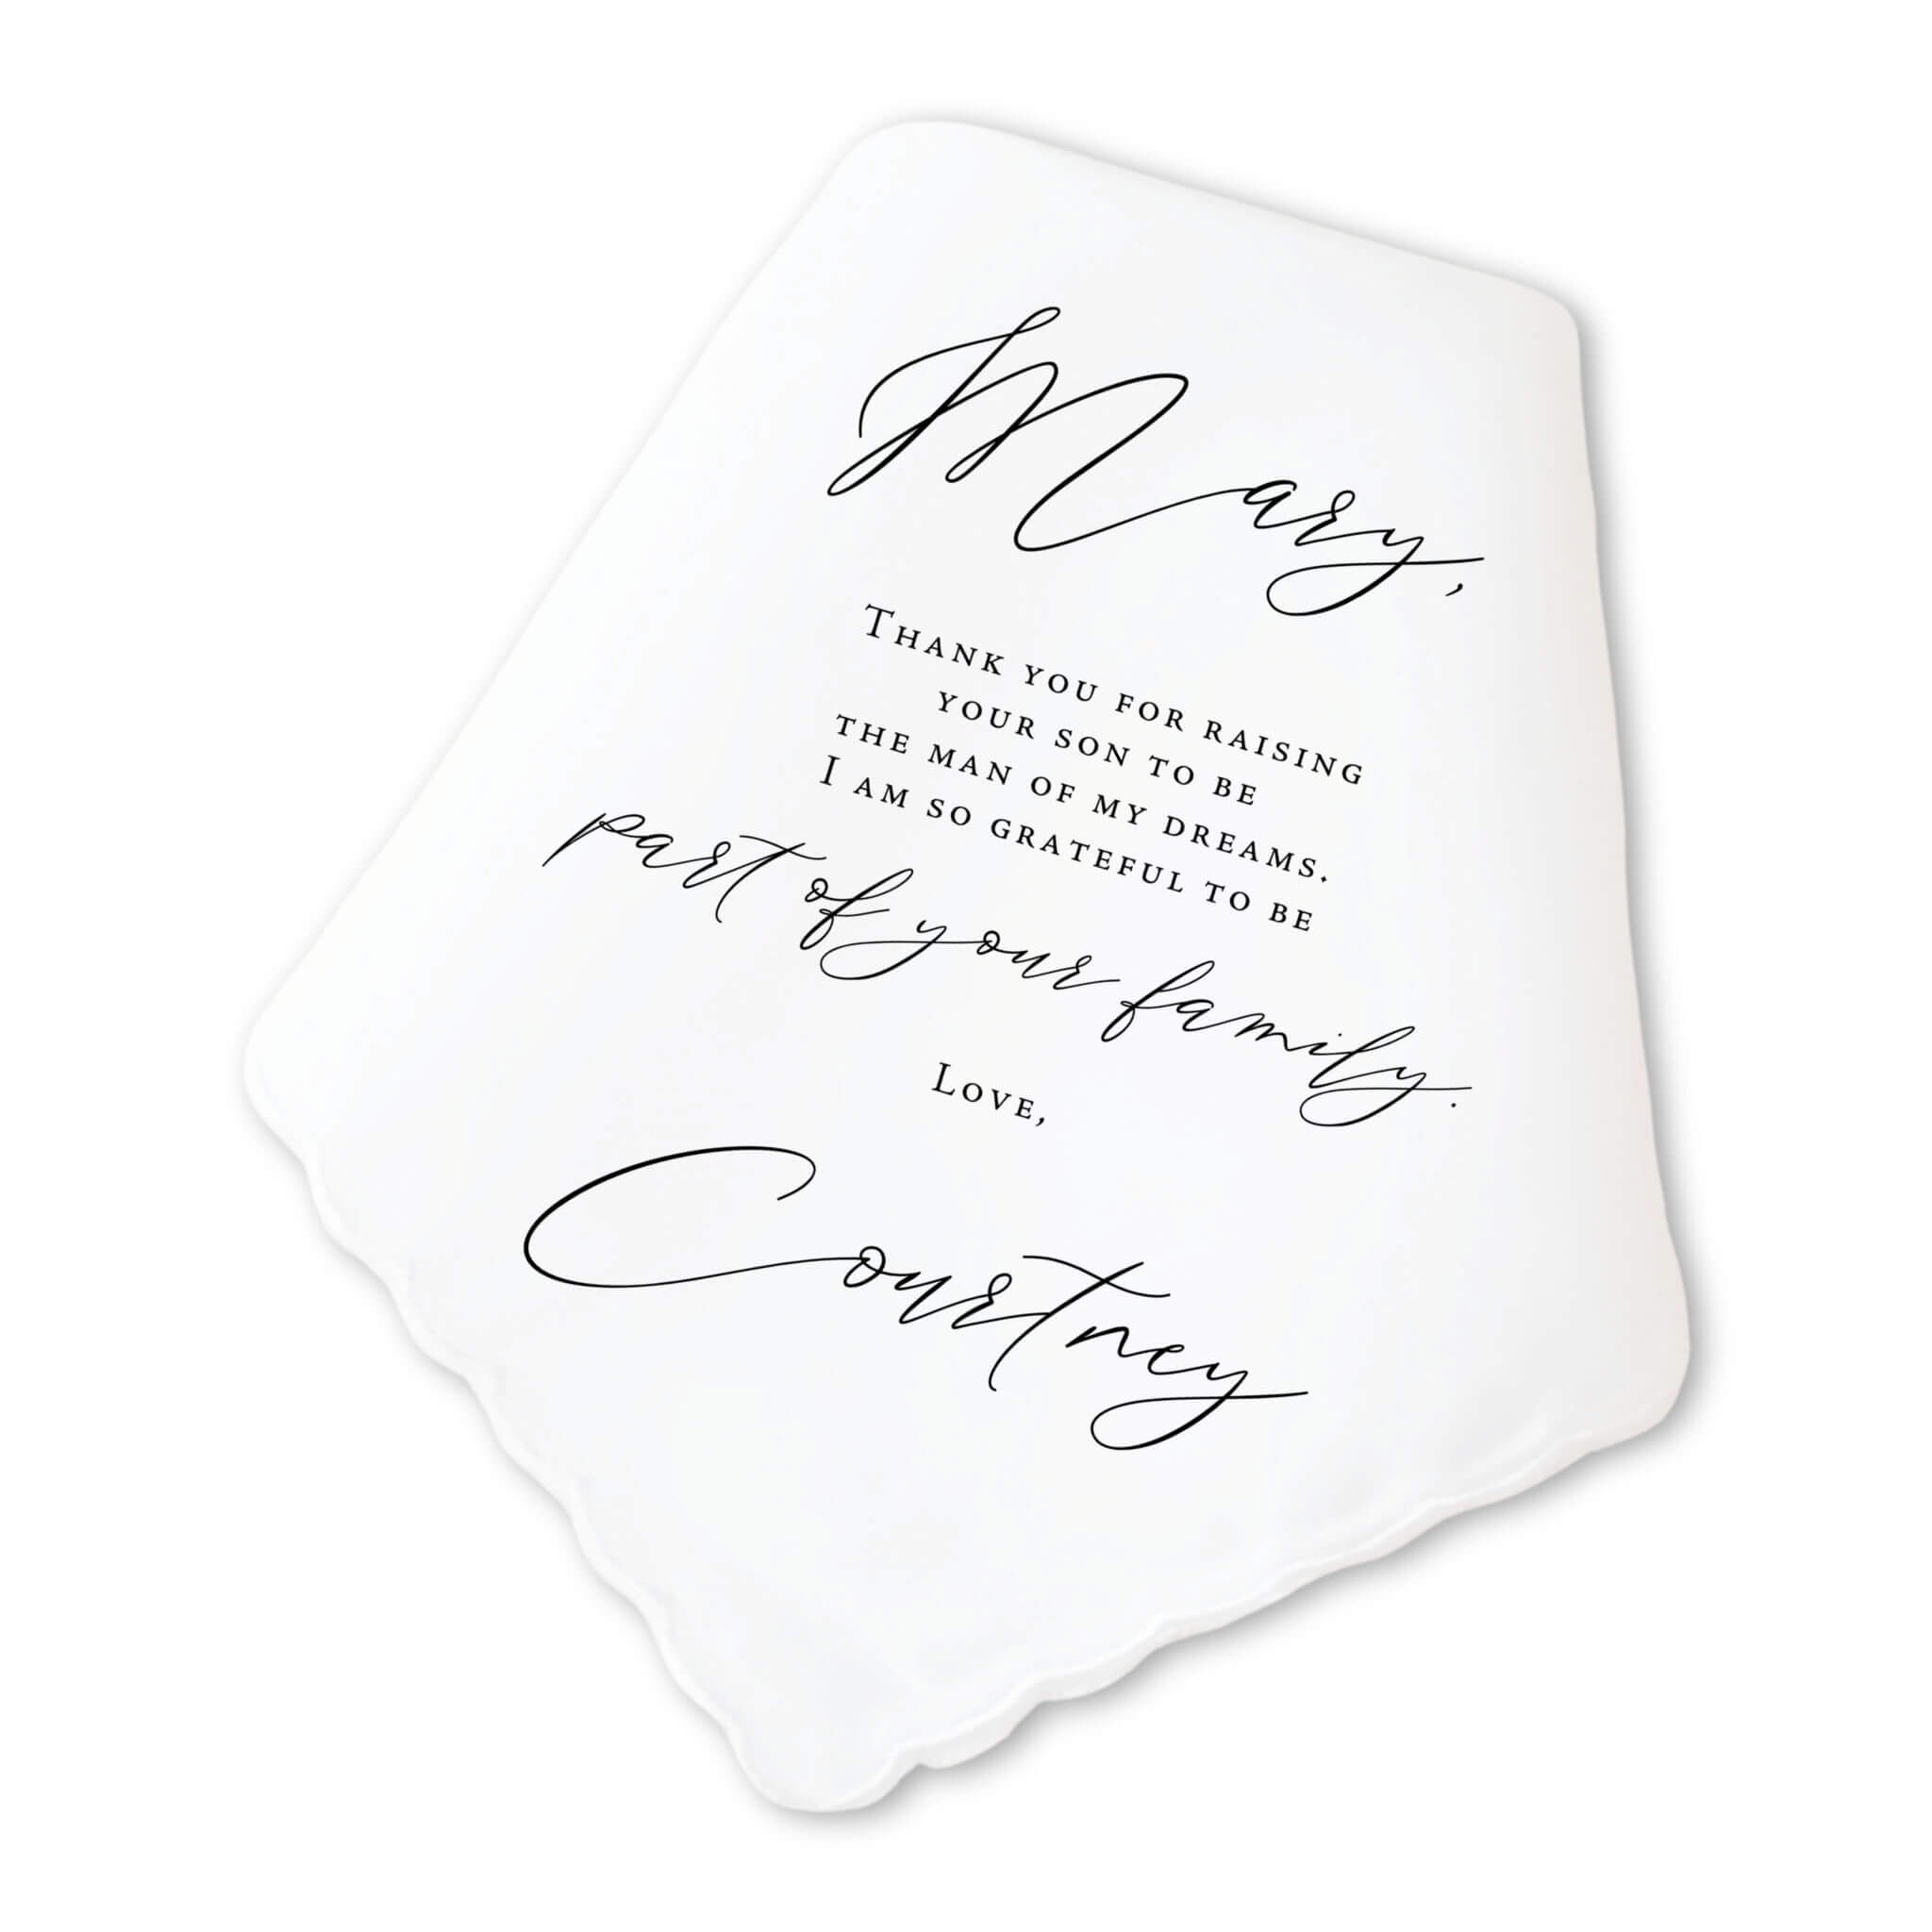 classic mother in law personalized handkerchief wedding gift